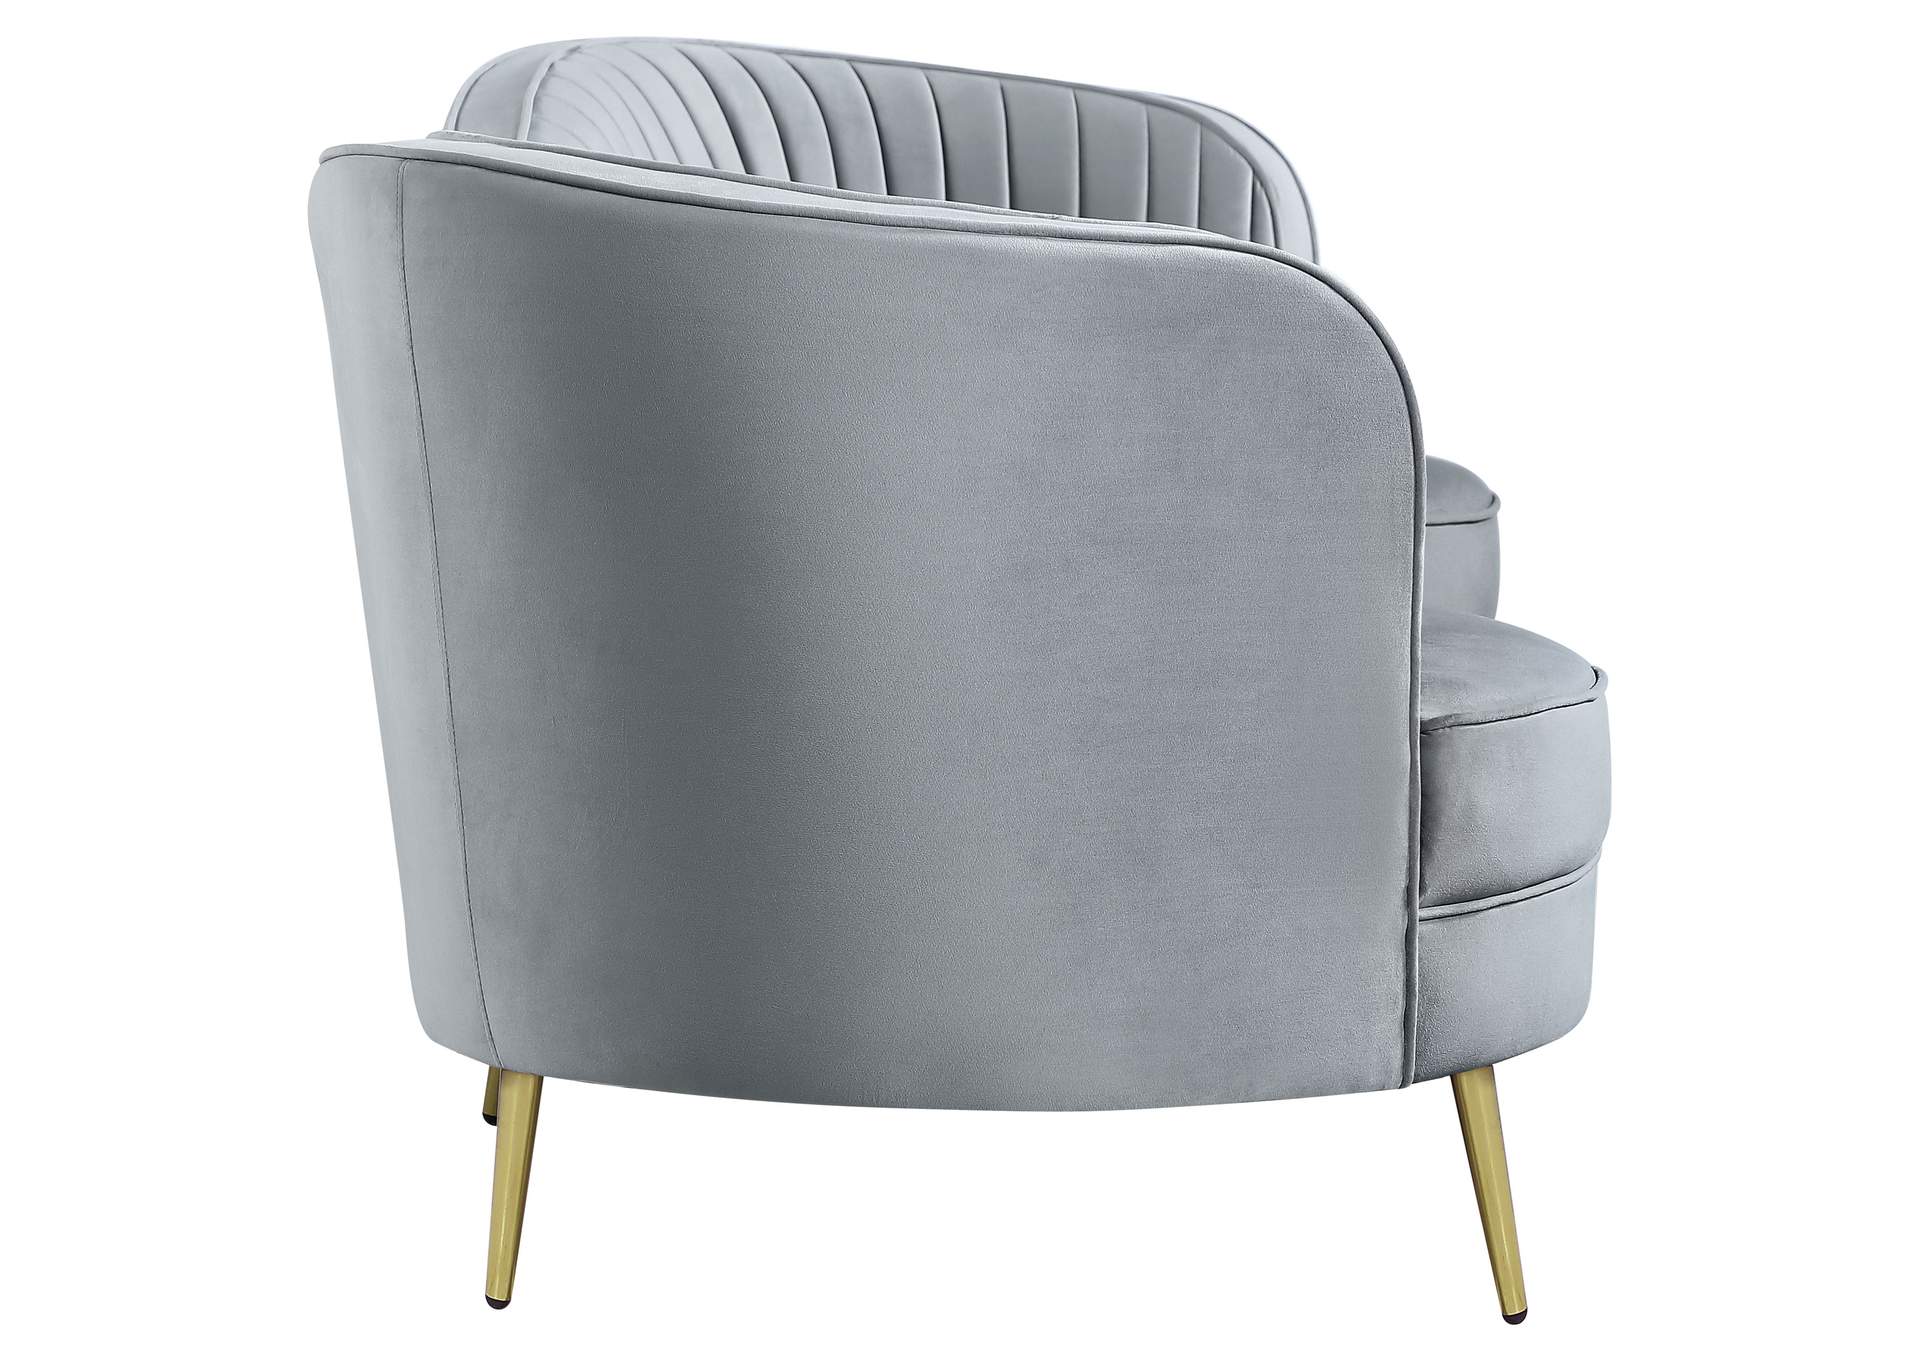 Sophia Upholstered Sofa with Camel Back Grey and Gold,Coaster Furniture